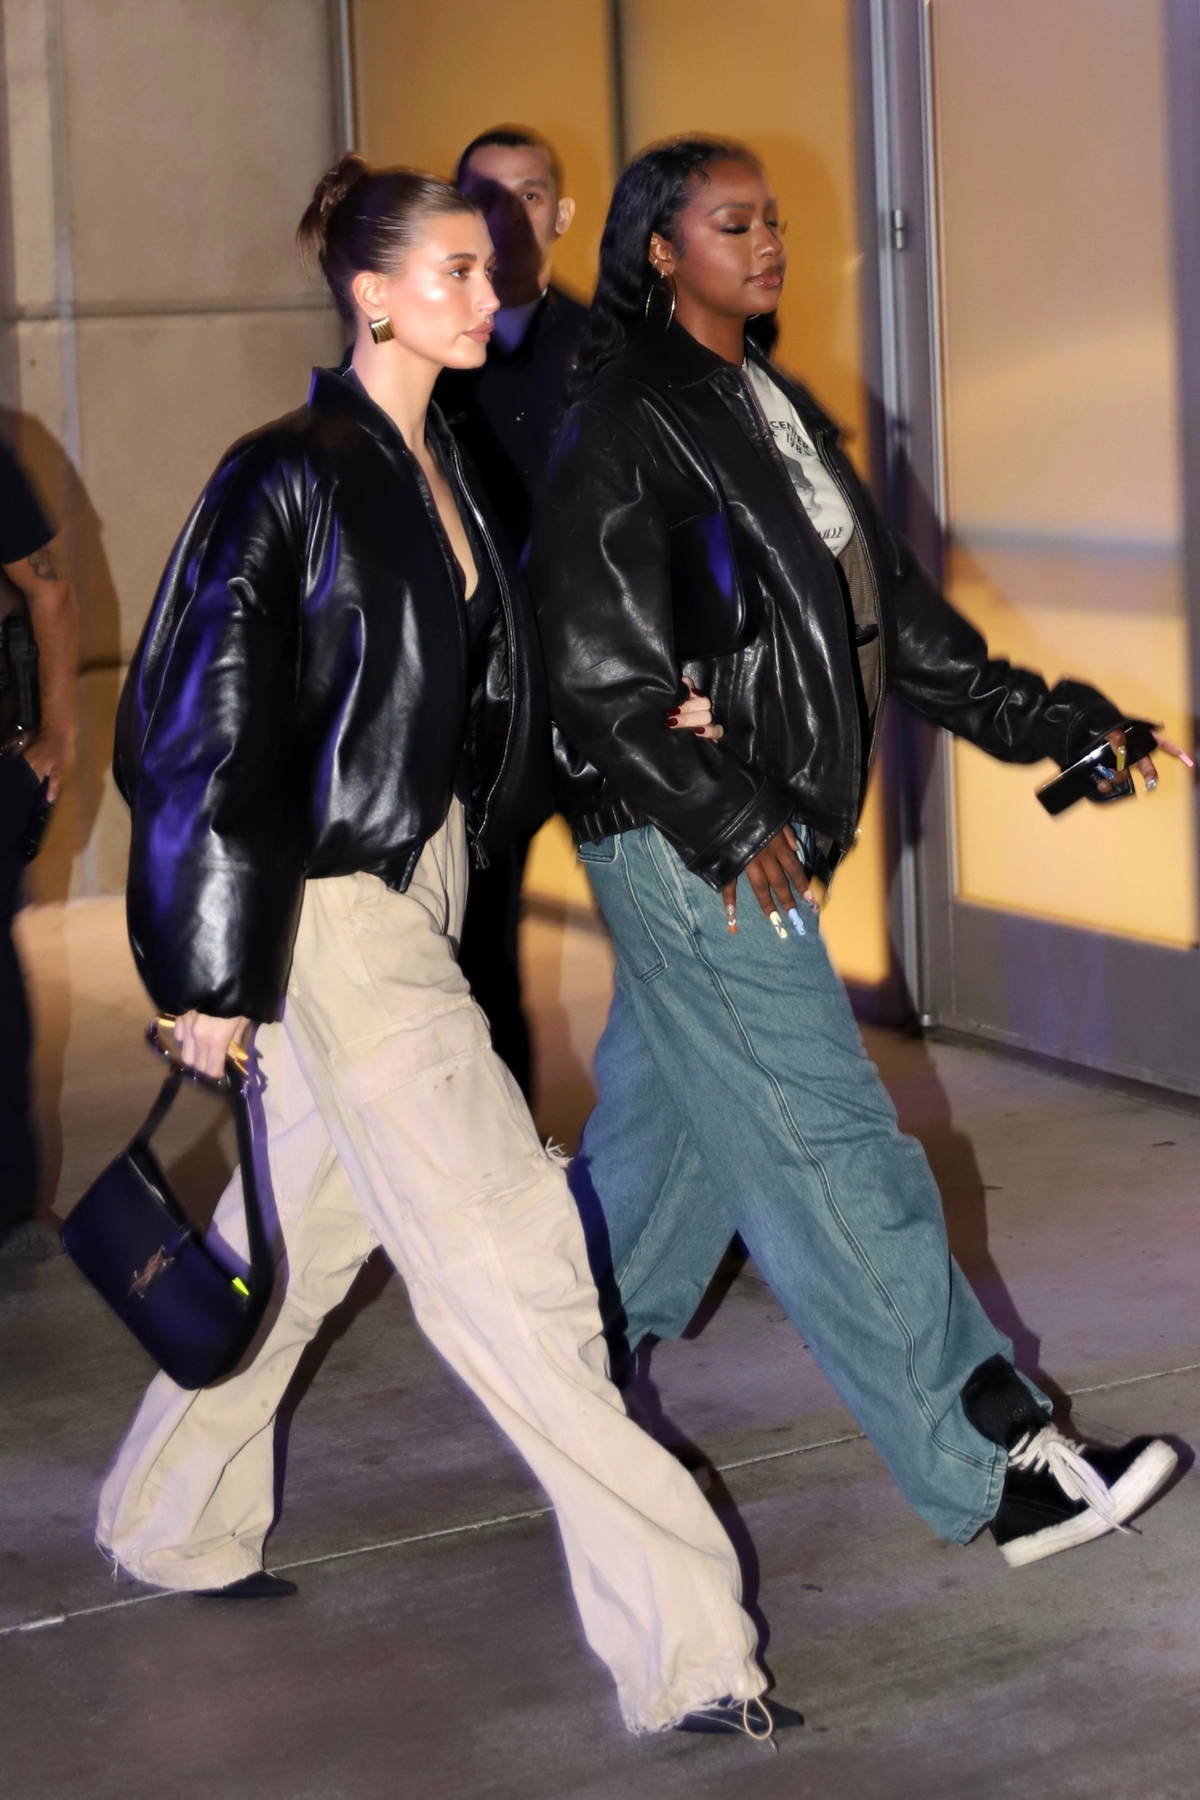 Hailey x Justin leaving the Lakers game at Staples Center // Oct22, 2021